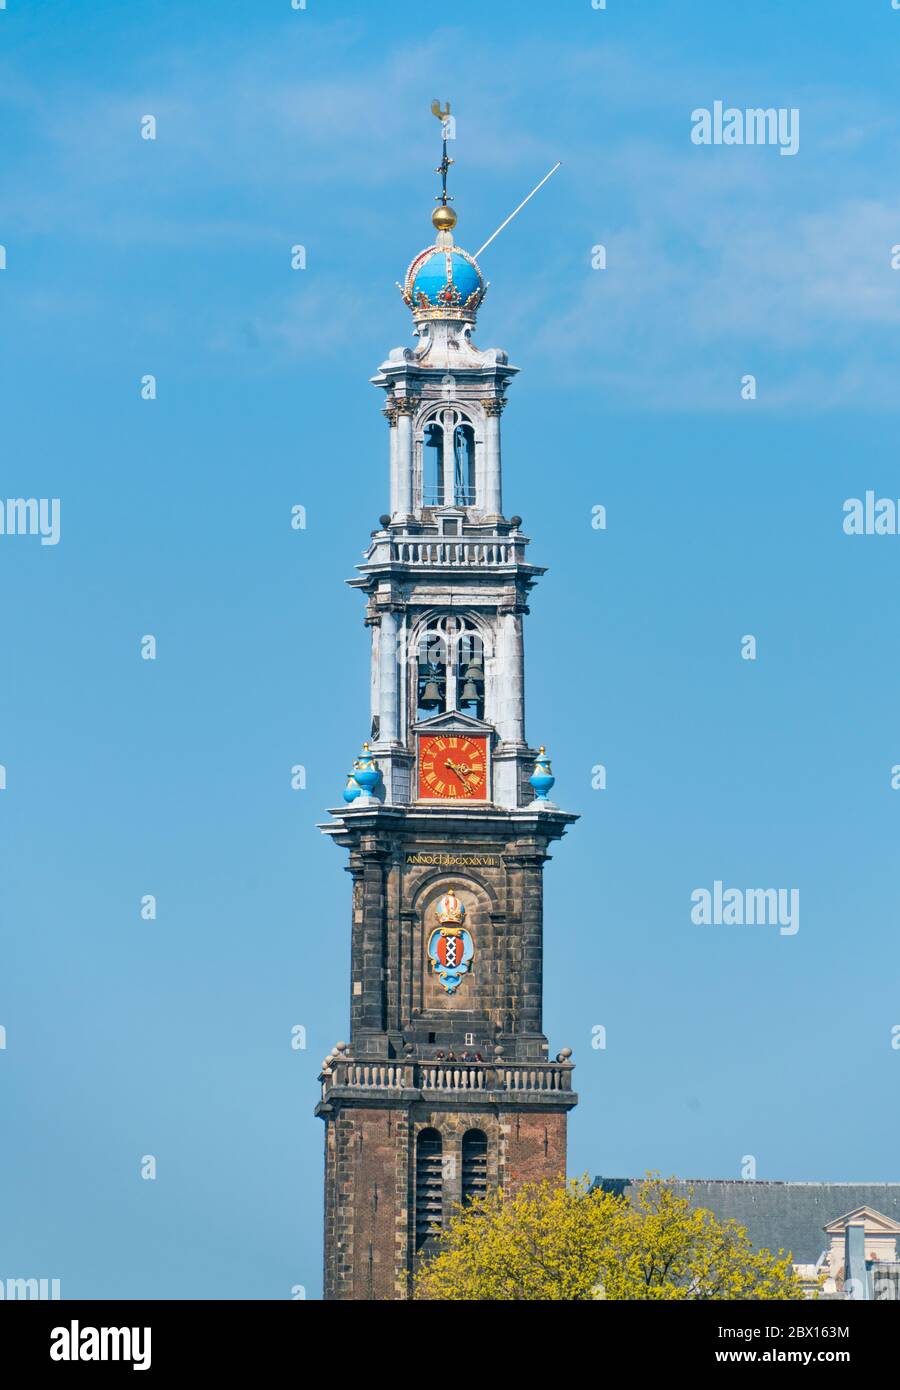 Amsterdam, april 9th, 2019 - Top part of the famous Westertoren (Western tower) Stock Photo